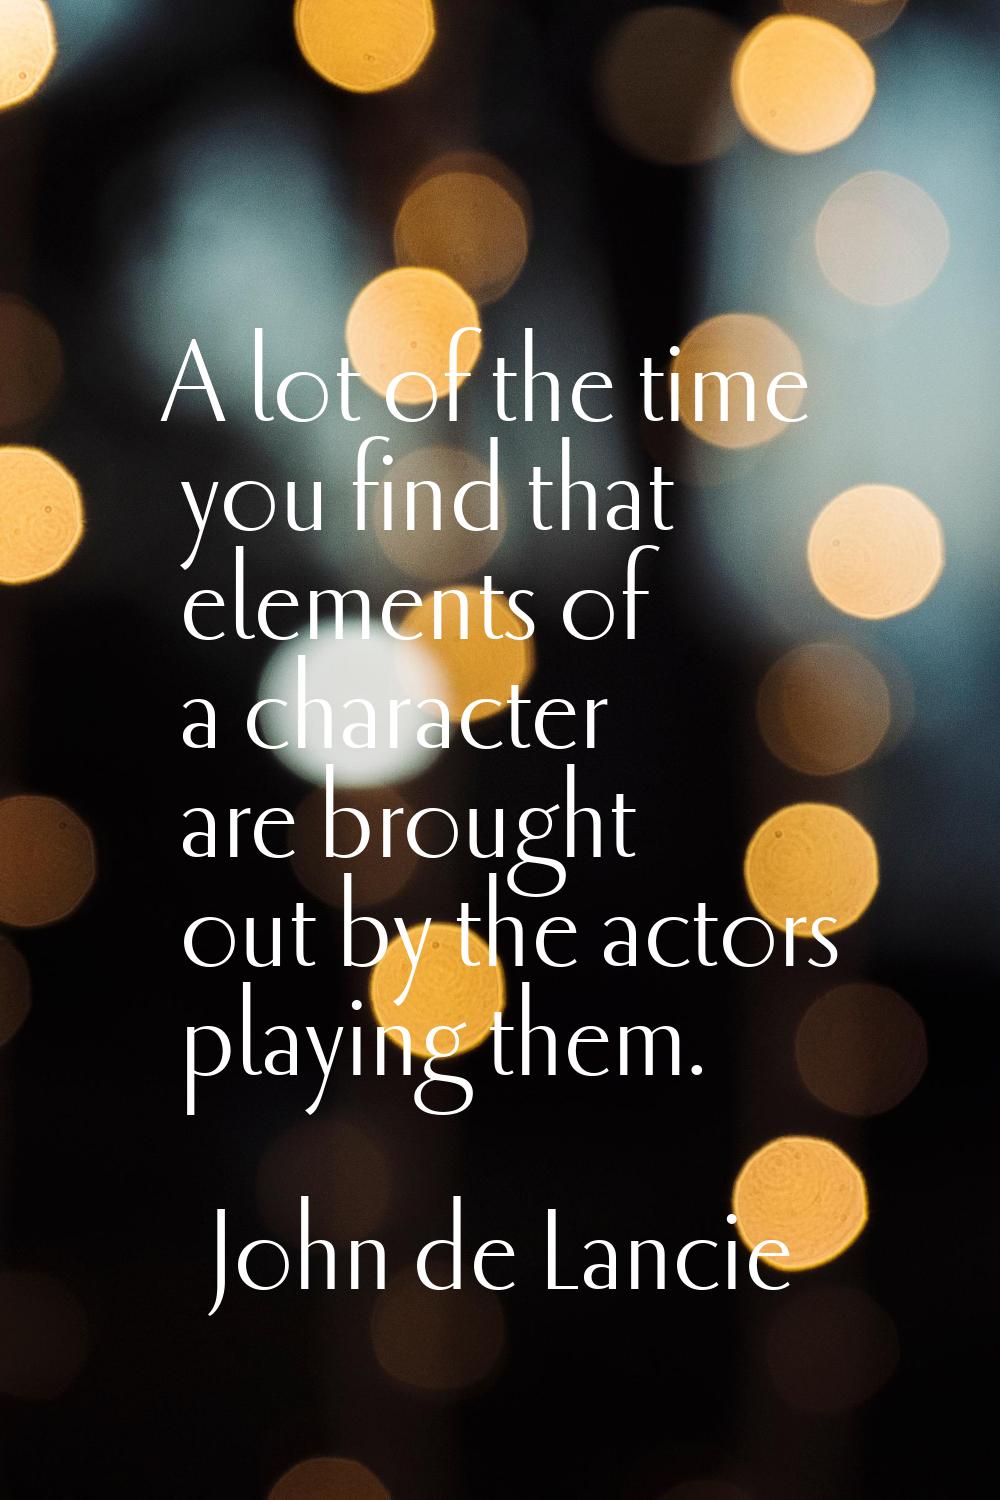 A lot of the time you find that elements of a character are brought out by the actors playing them.